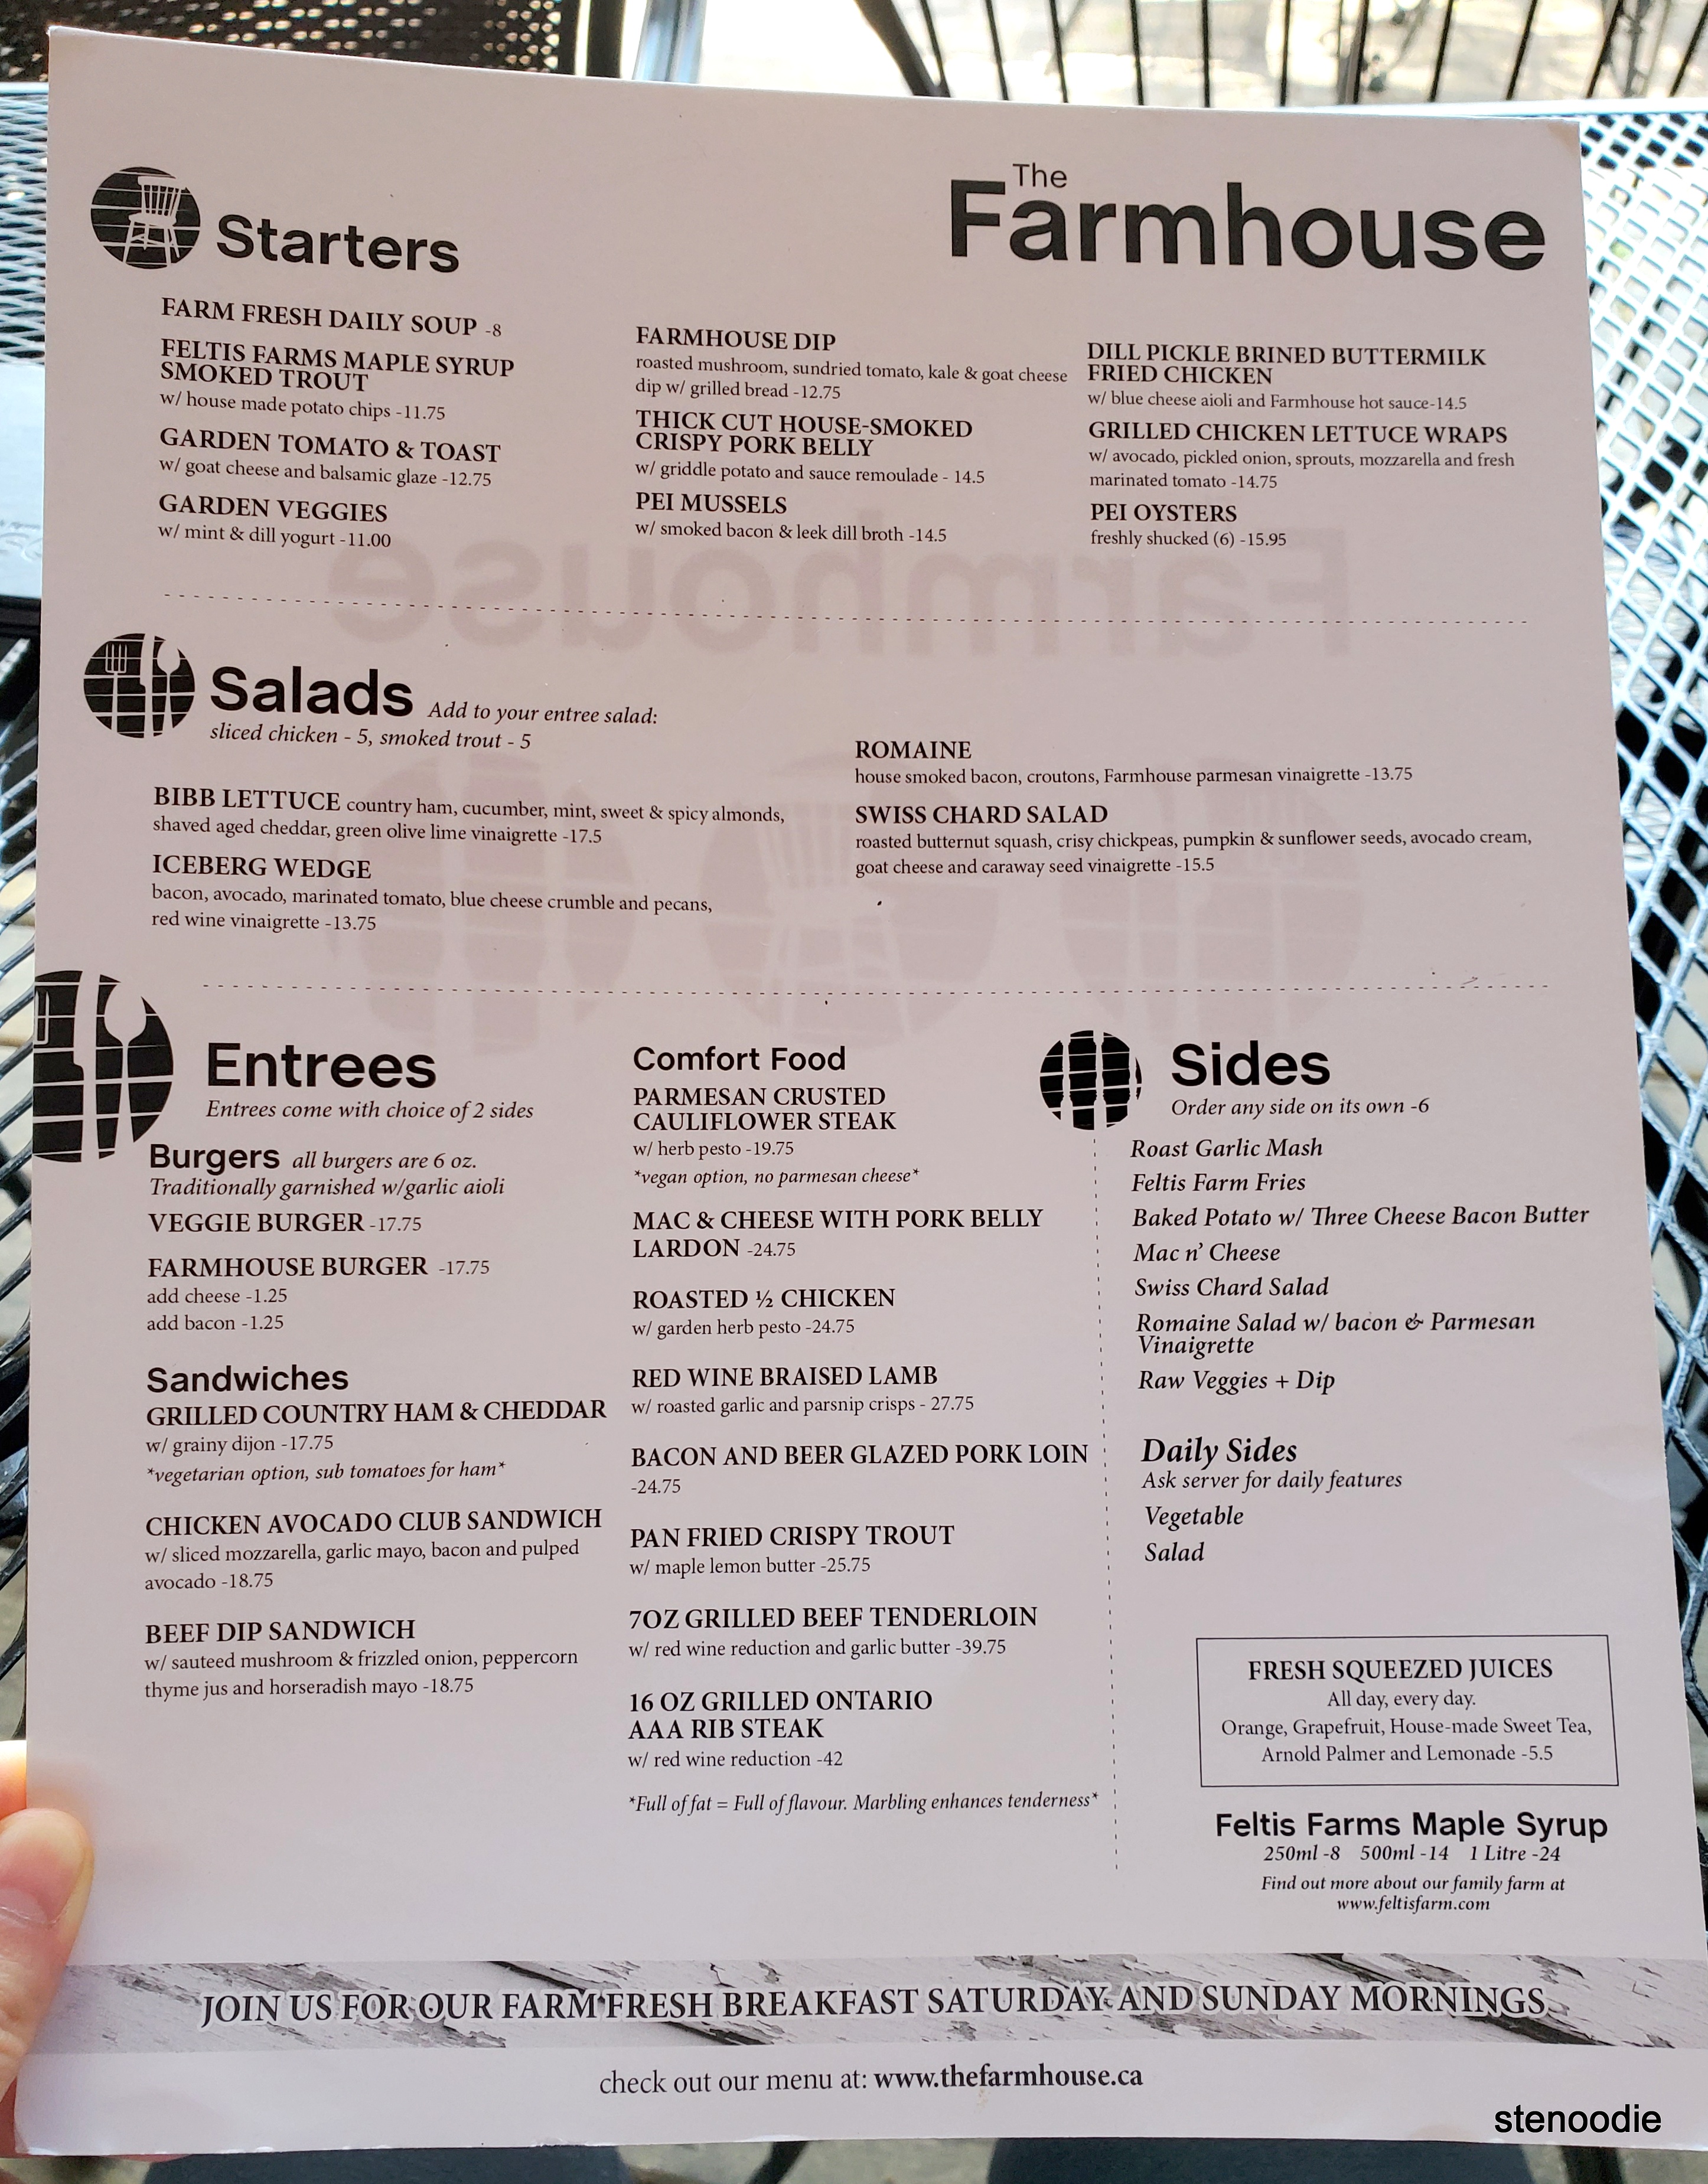  The Farmhouse Restaurant menu and prices